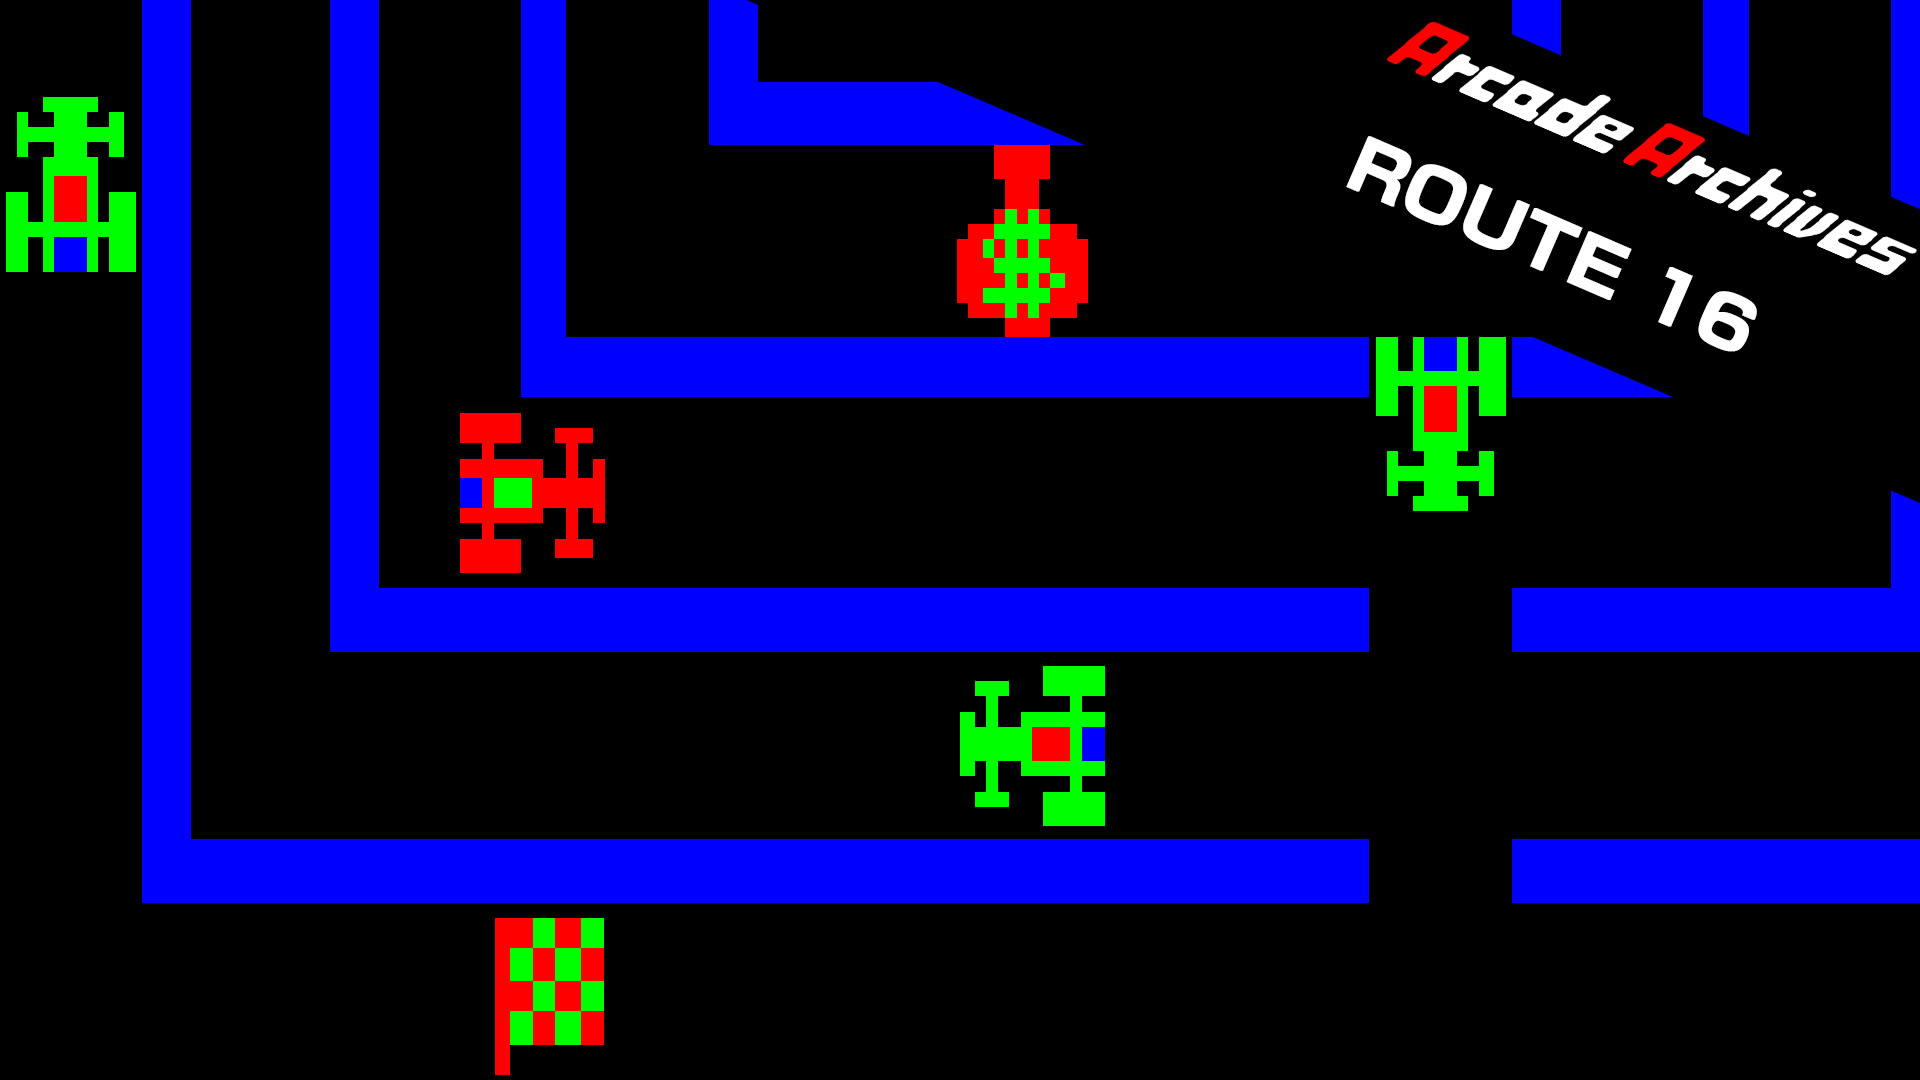 Arcade Archives ROUTE 16 1